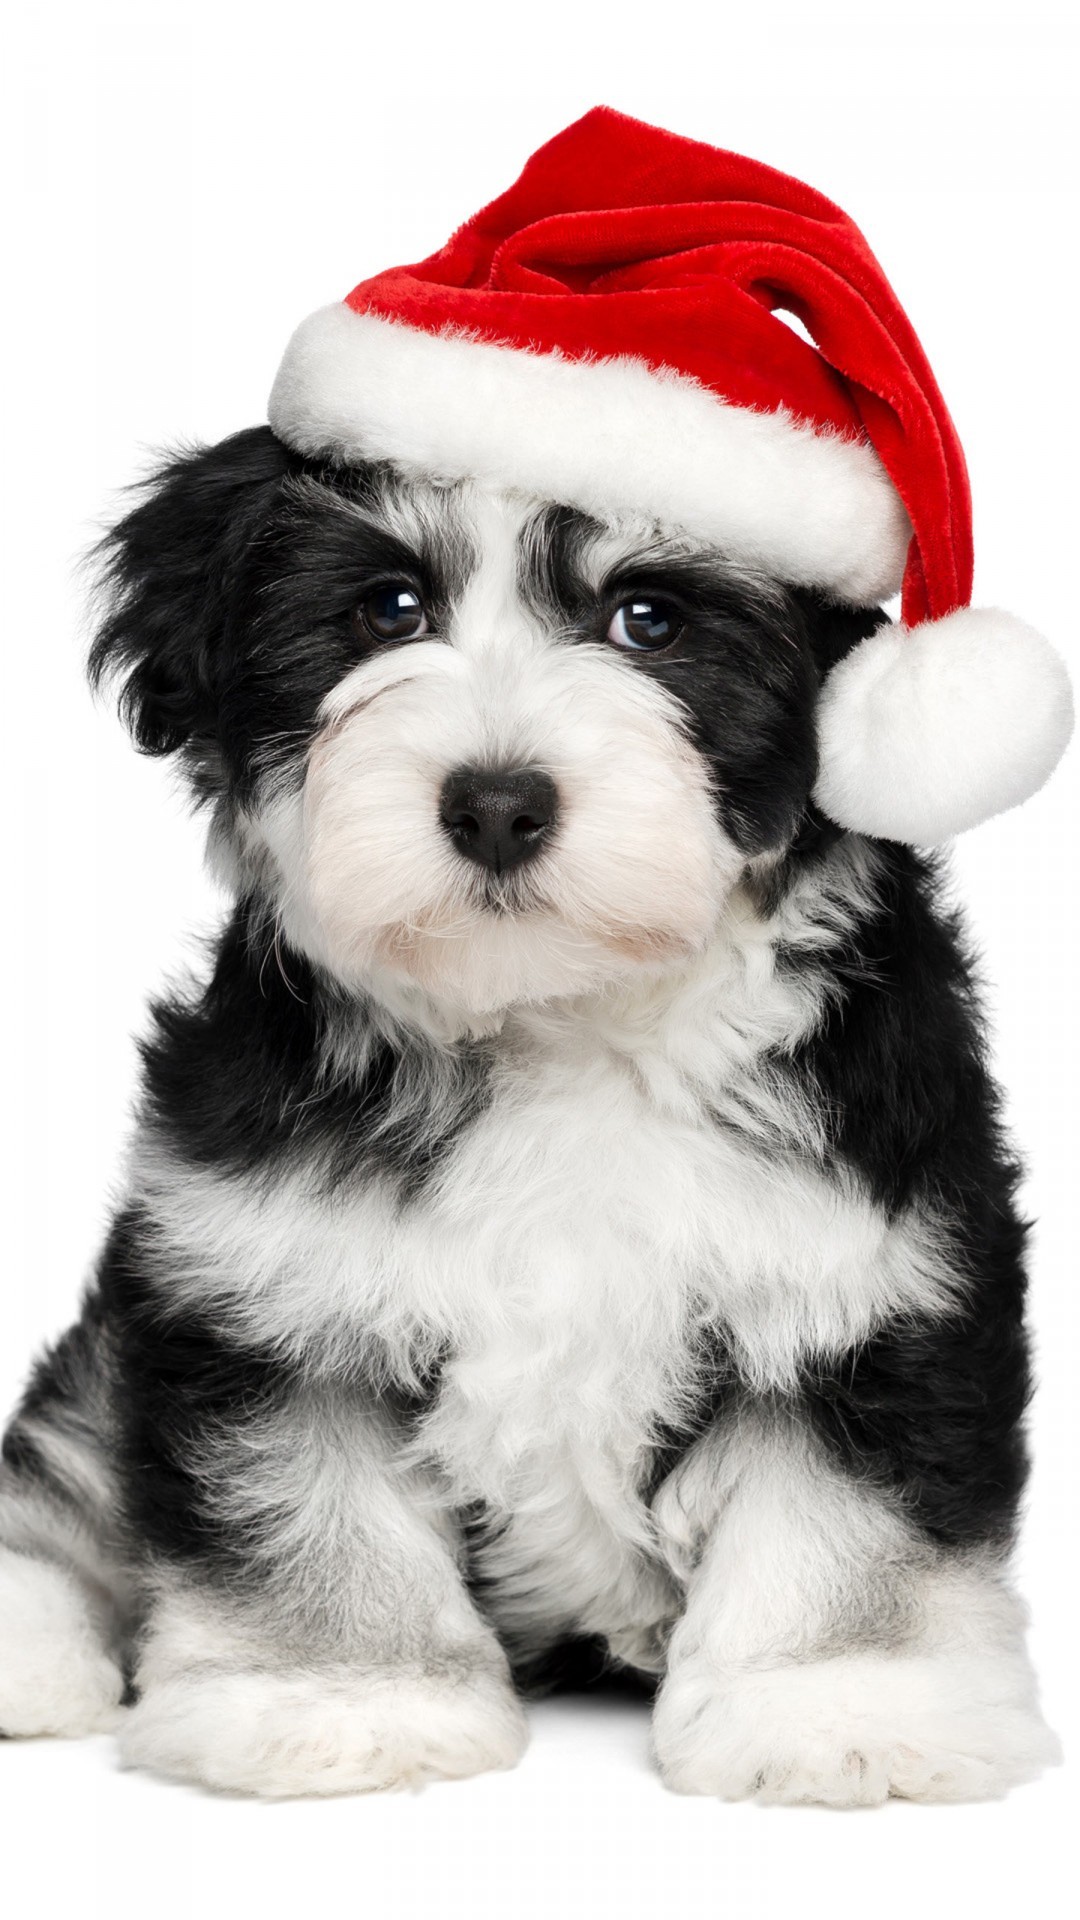 A Cute Little Poodle - Christmas Dogs Wallpaper Iphone , HD Wallpaper & Backgrounds